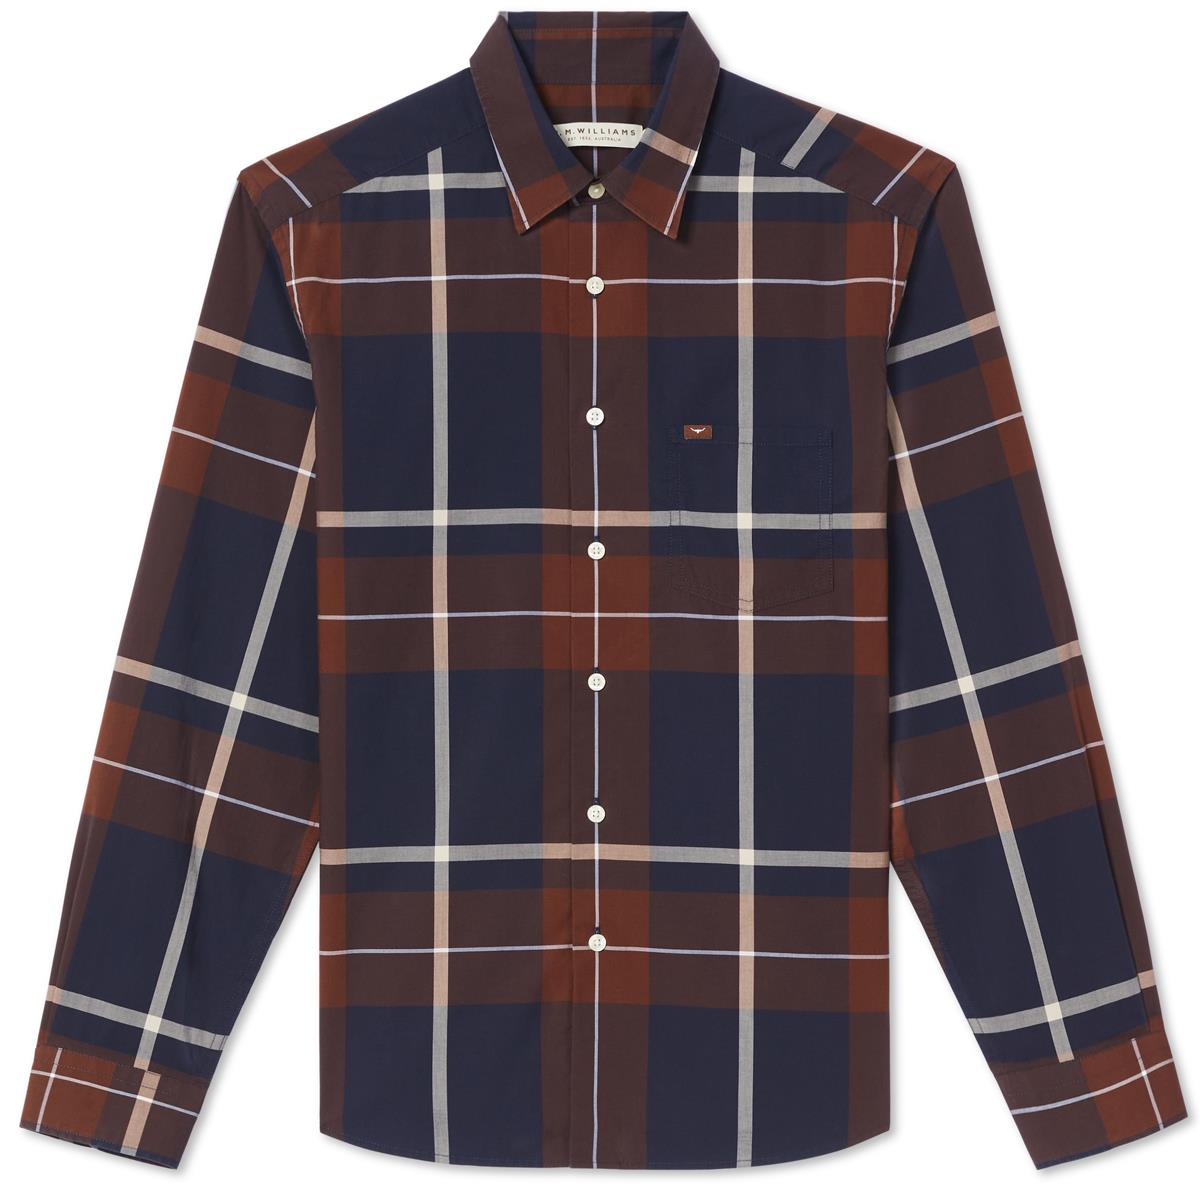 R.M. Williams Mens Coalcliff Shirt Questions & Answers